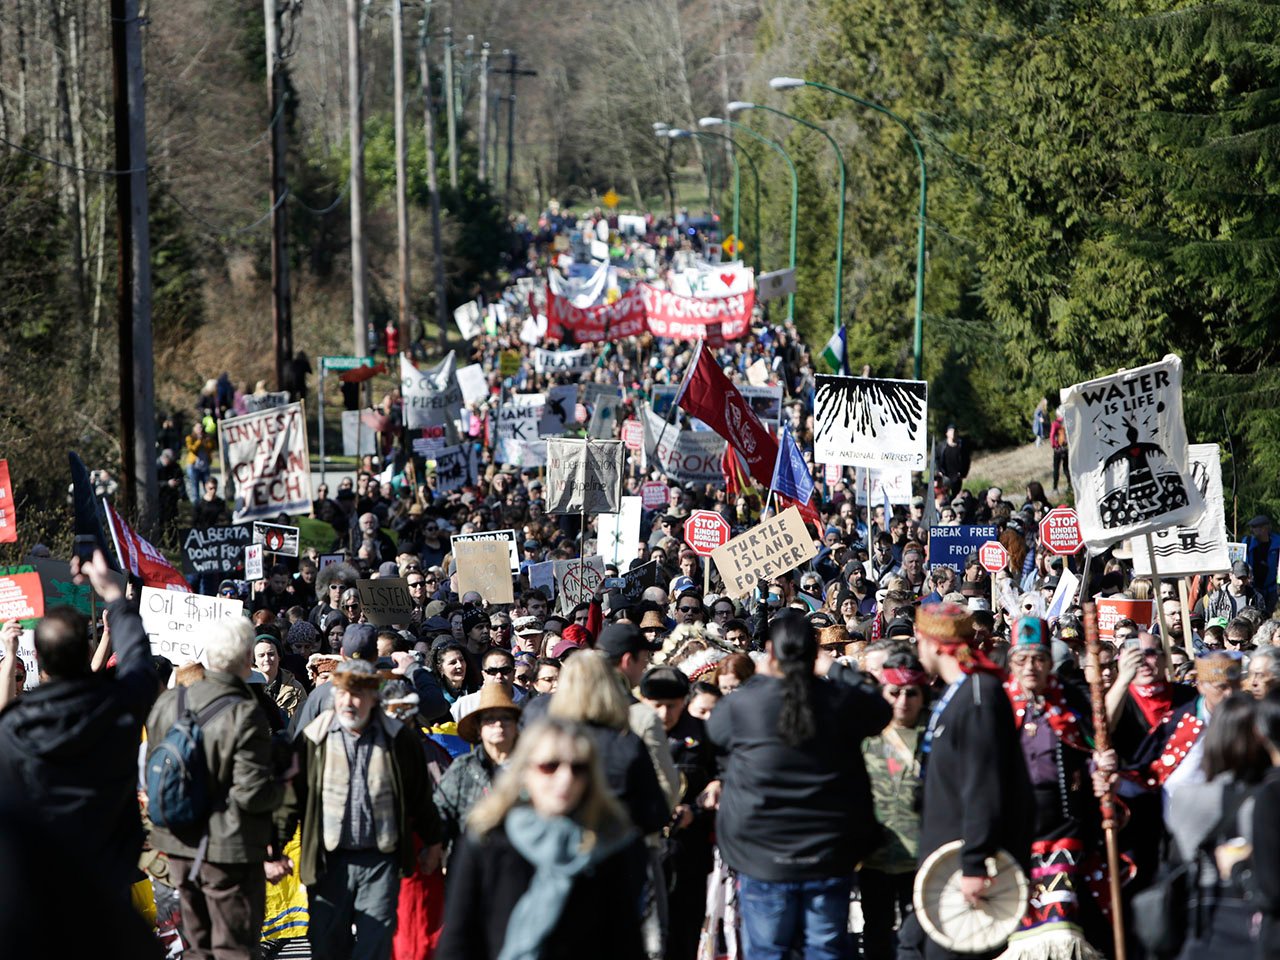 Everything you need to know about pipelines in Canada: Protestors march with signs through a forest-lined road